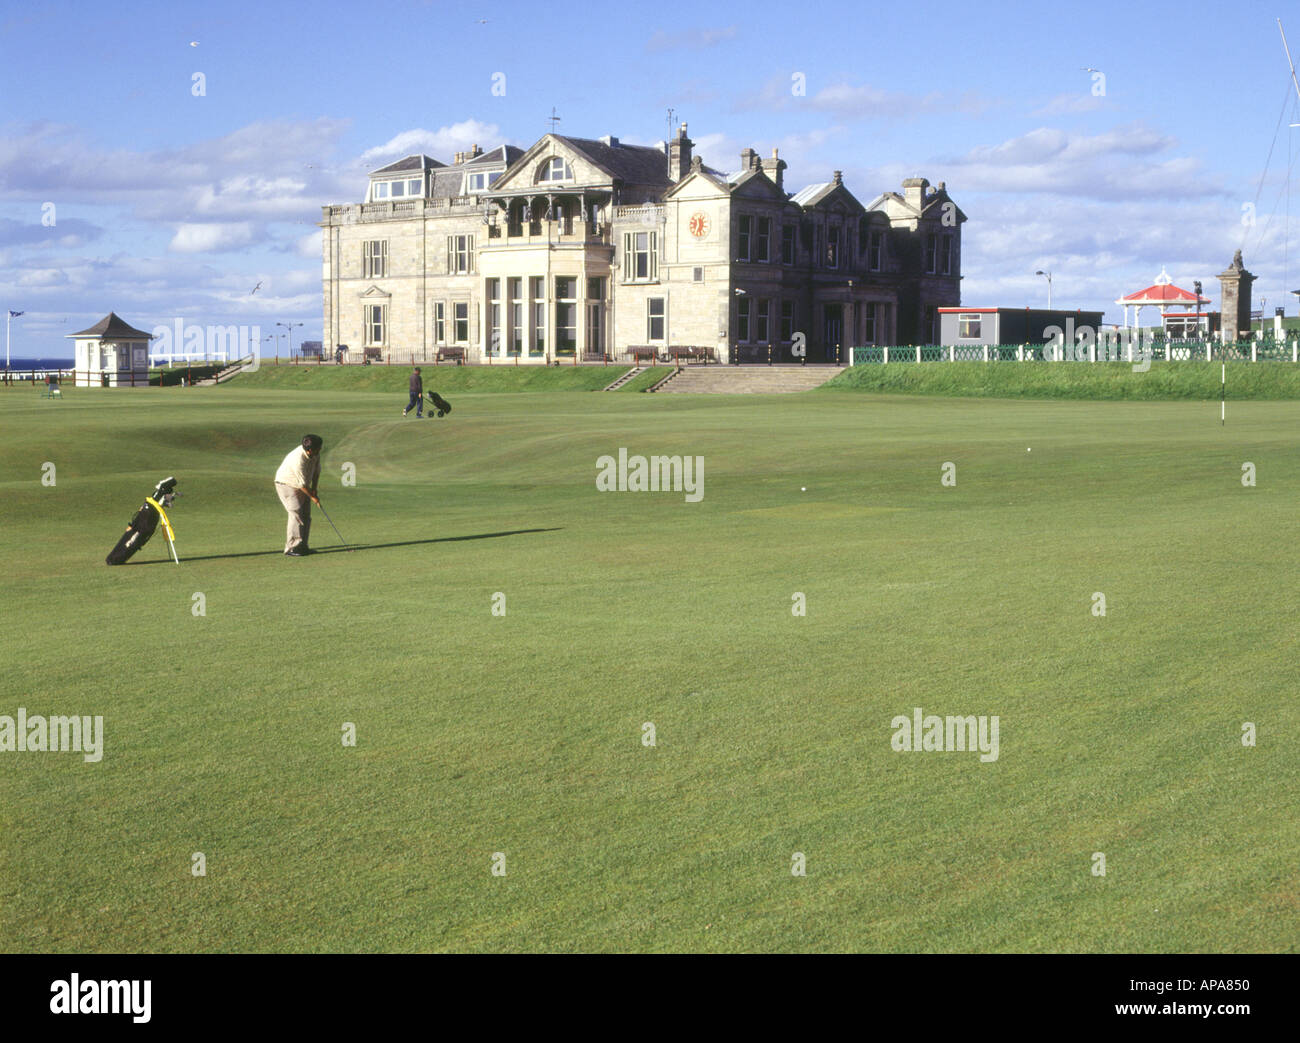 dh Golf ST ANDREWS FIFE Golfer playing eighteenth Royal and Ancient course club house scotland hole Stock Photo